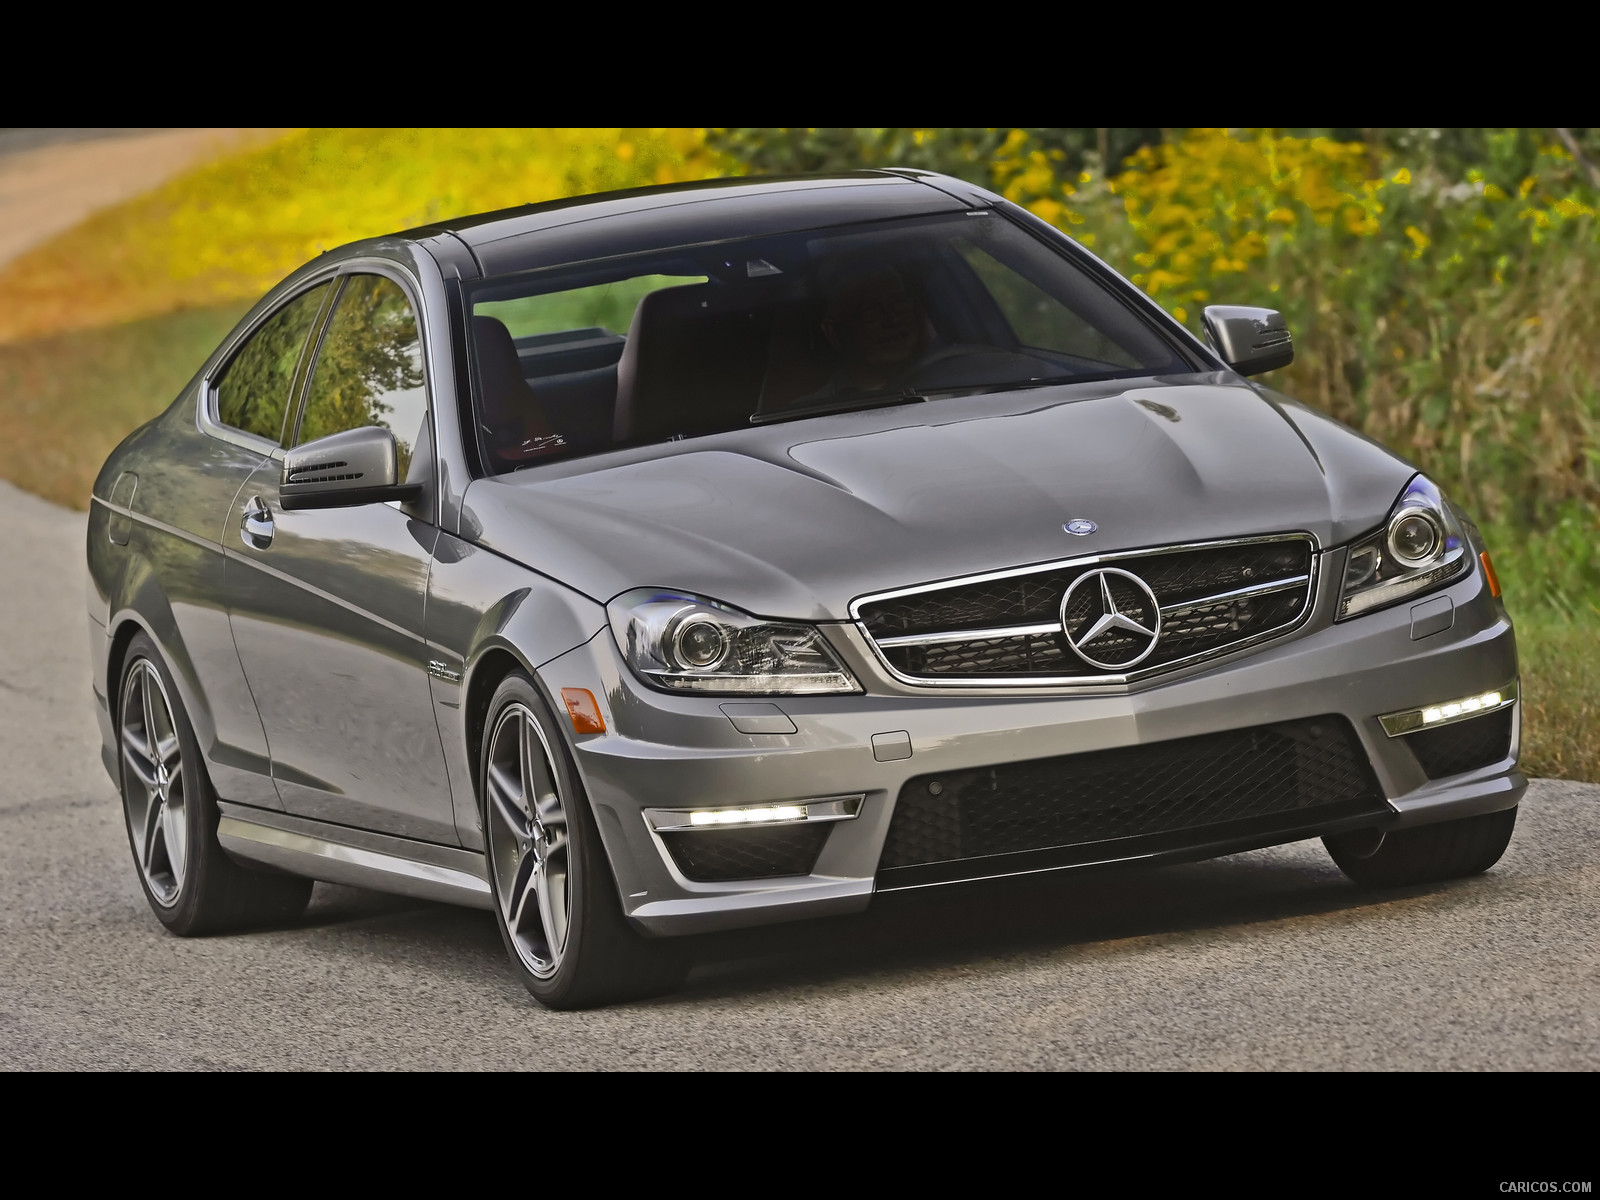 Mercedes-Benz C63 AMG Coupe (2012) with MCT transmission - , #4 of 64